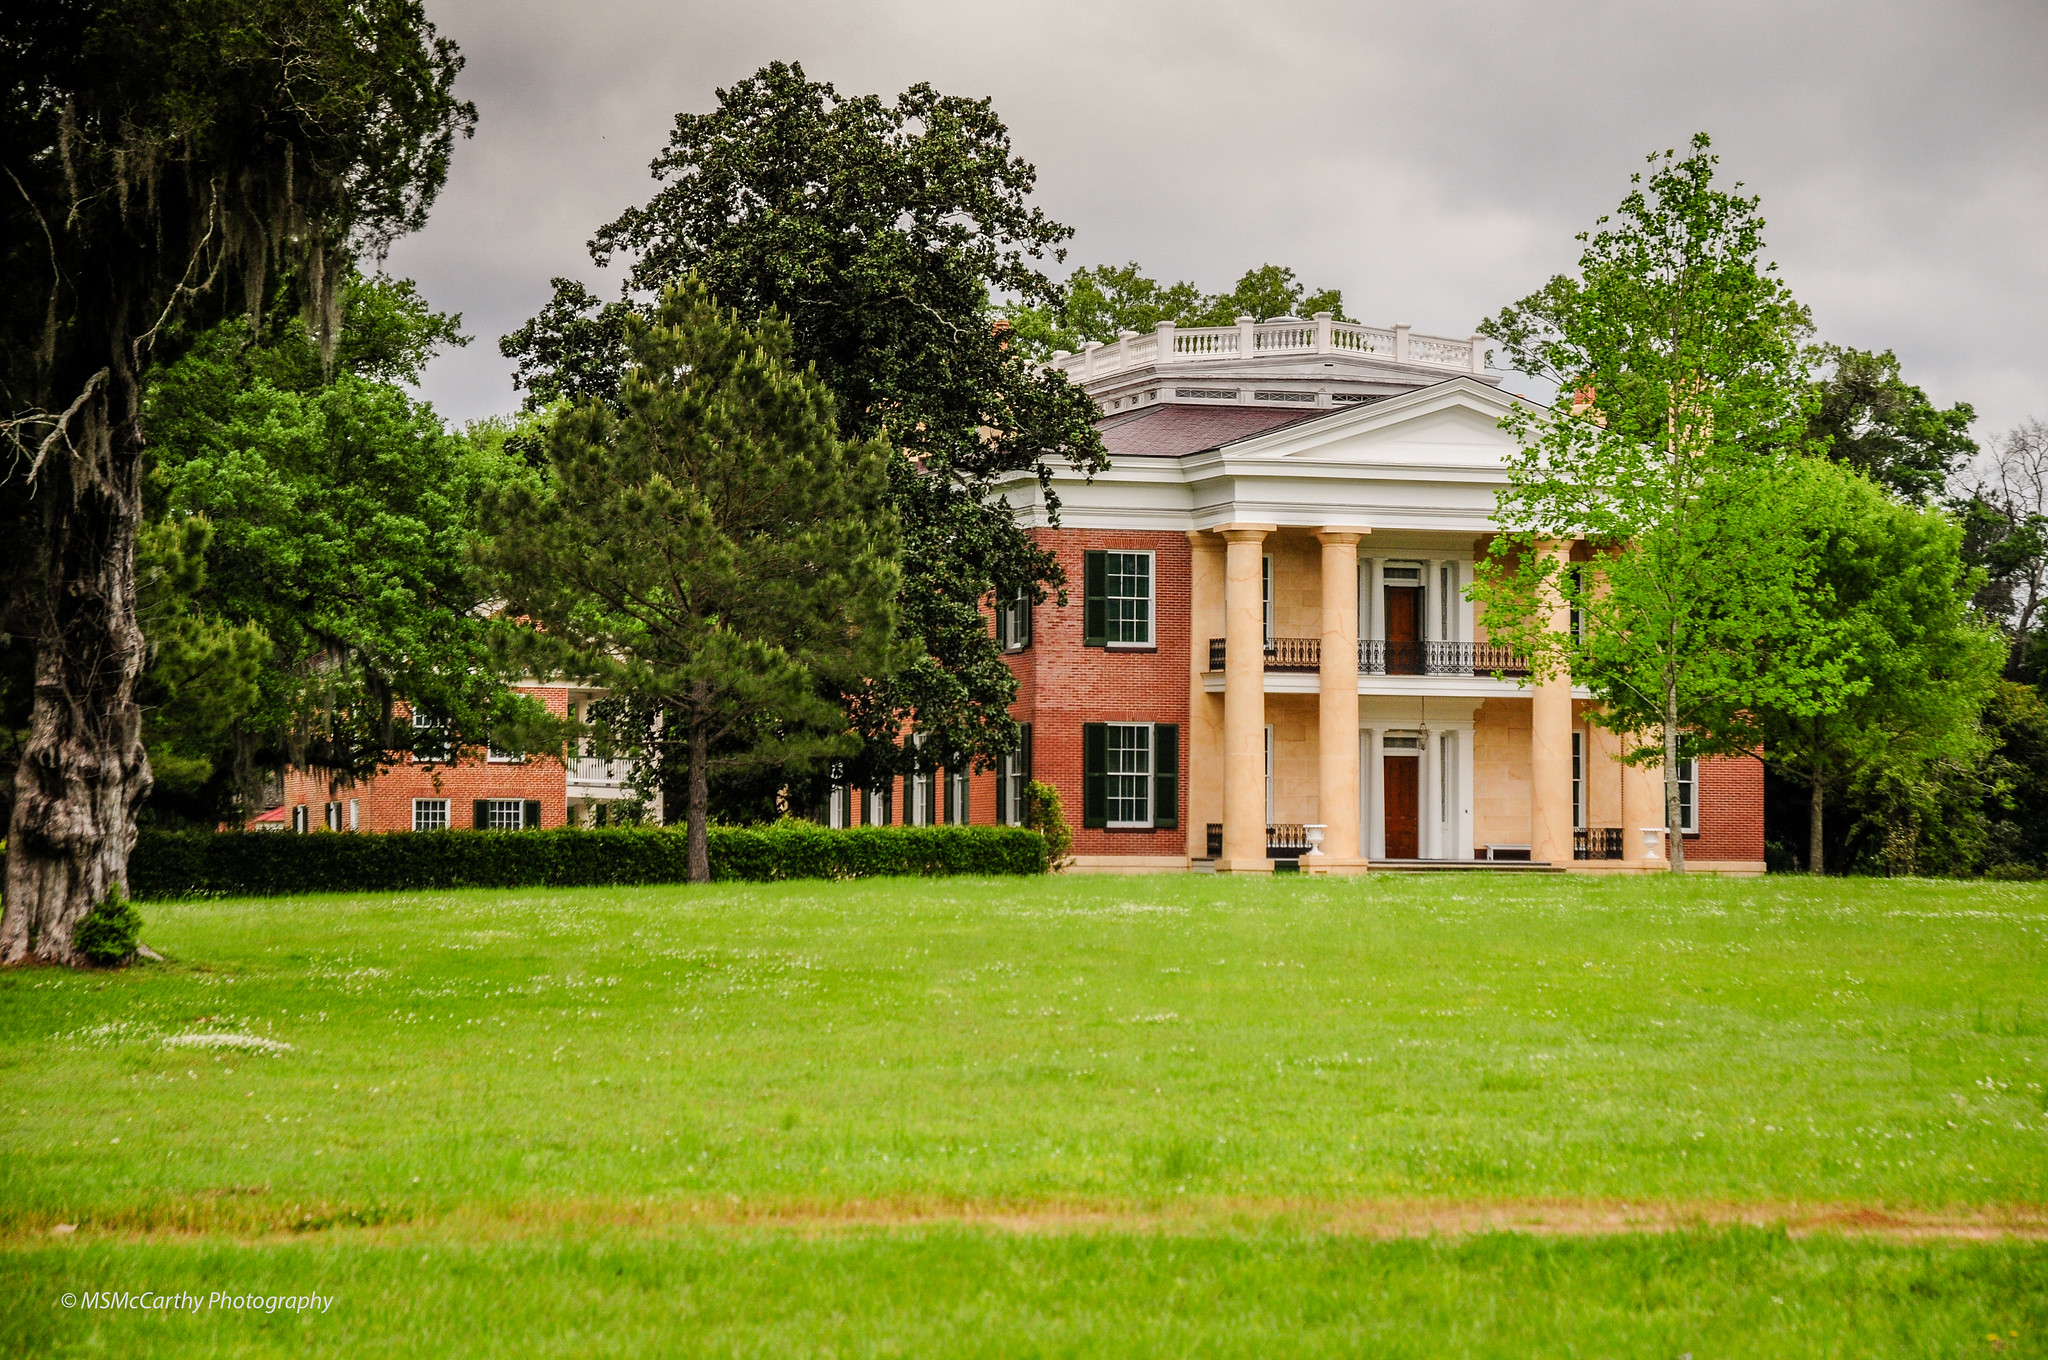 15 Things to do in Natchez, Mississippi